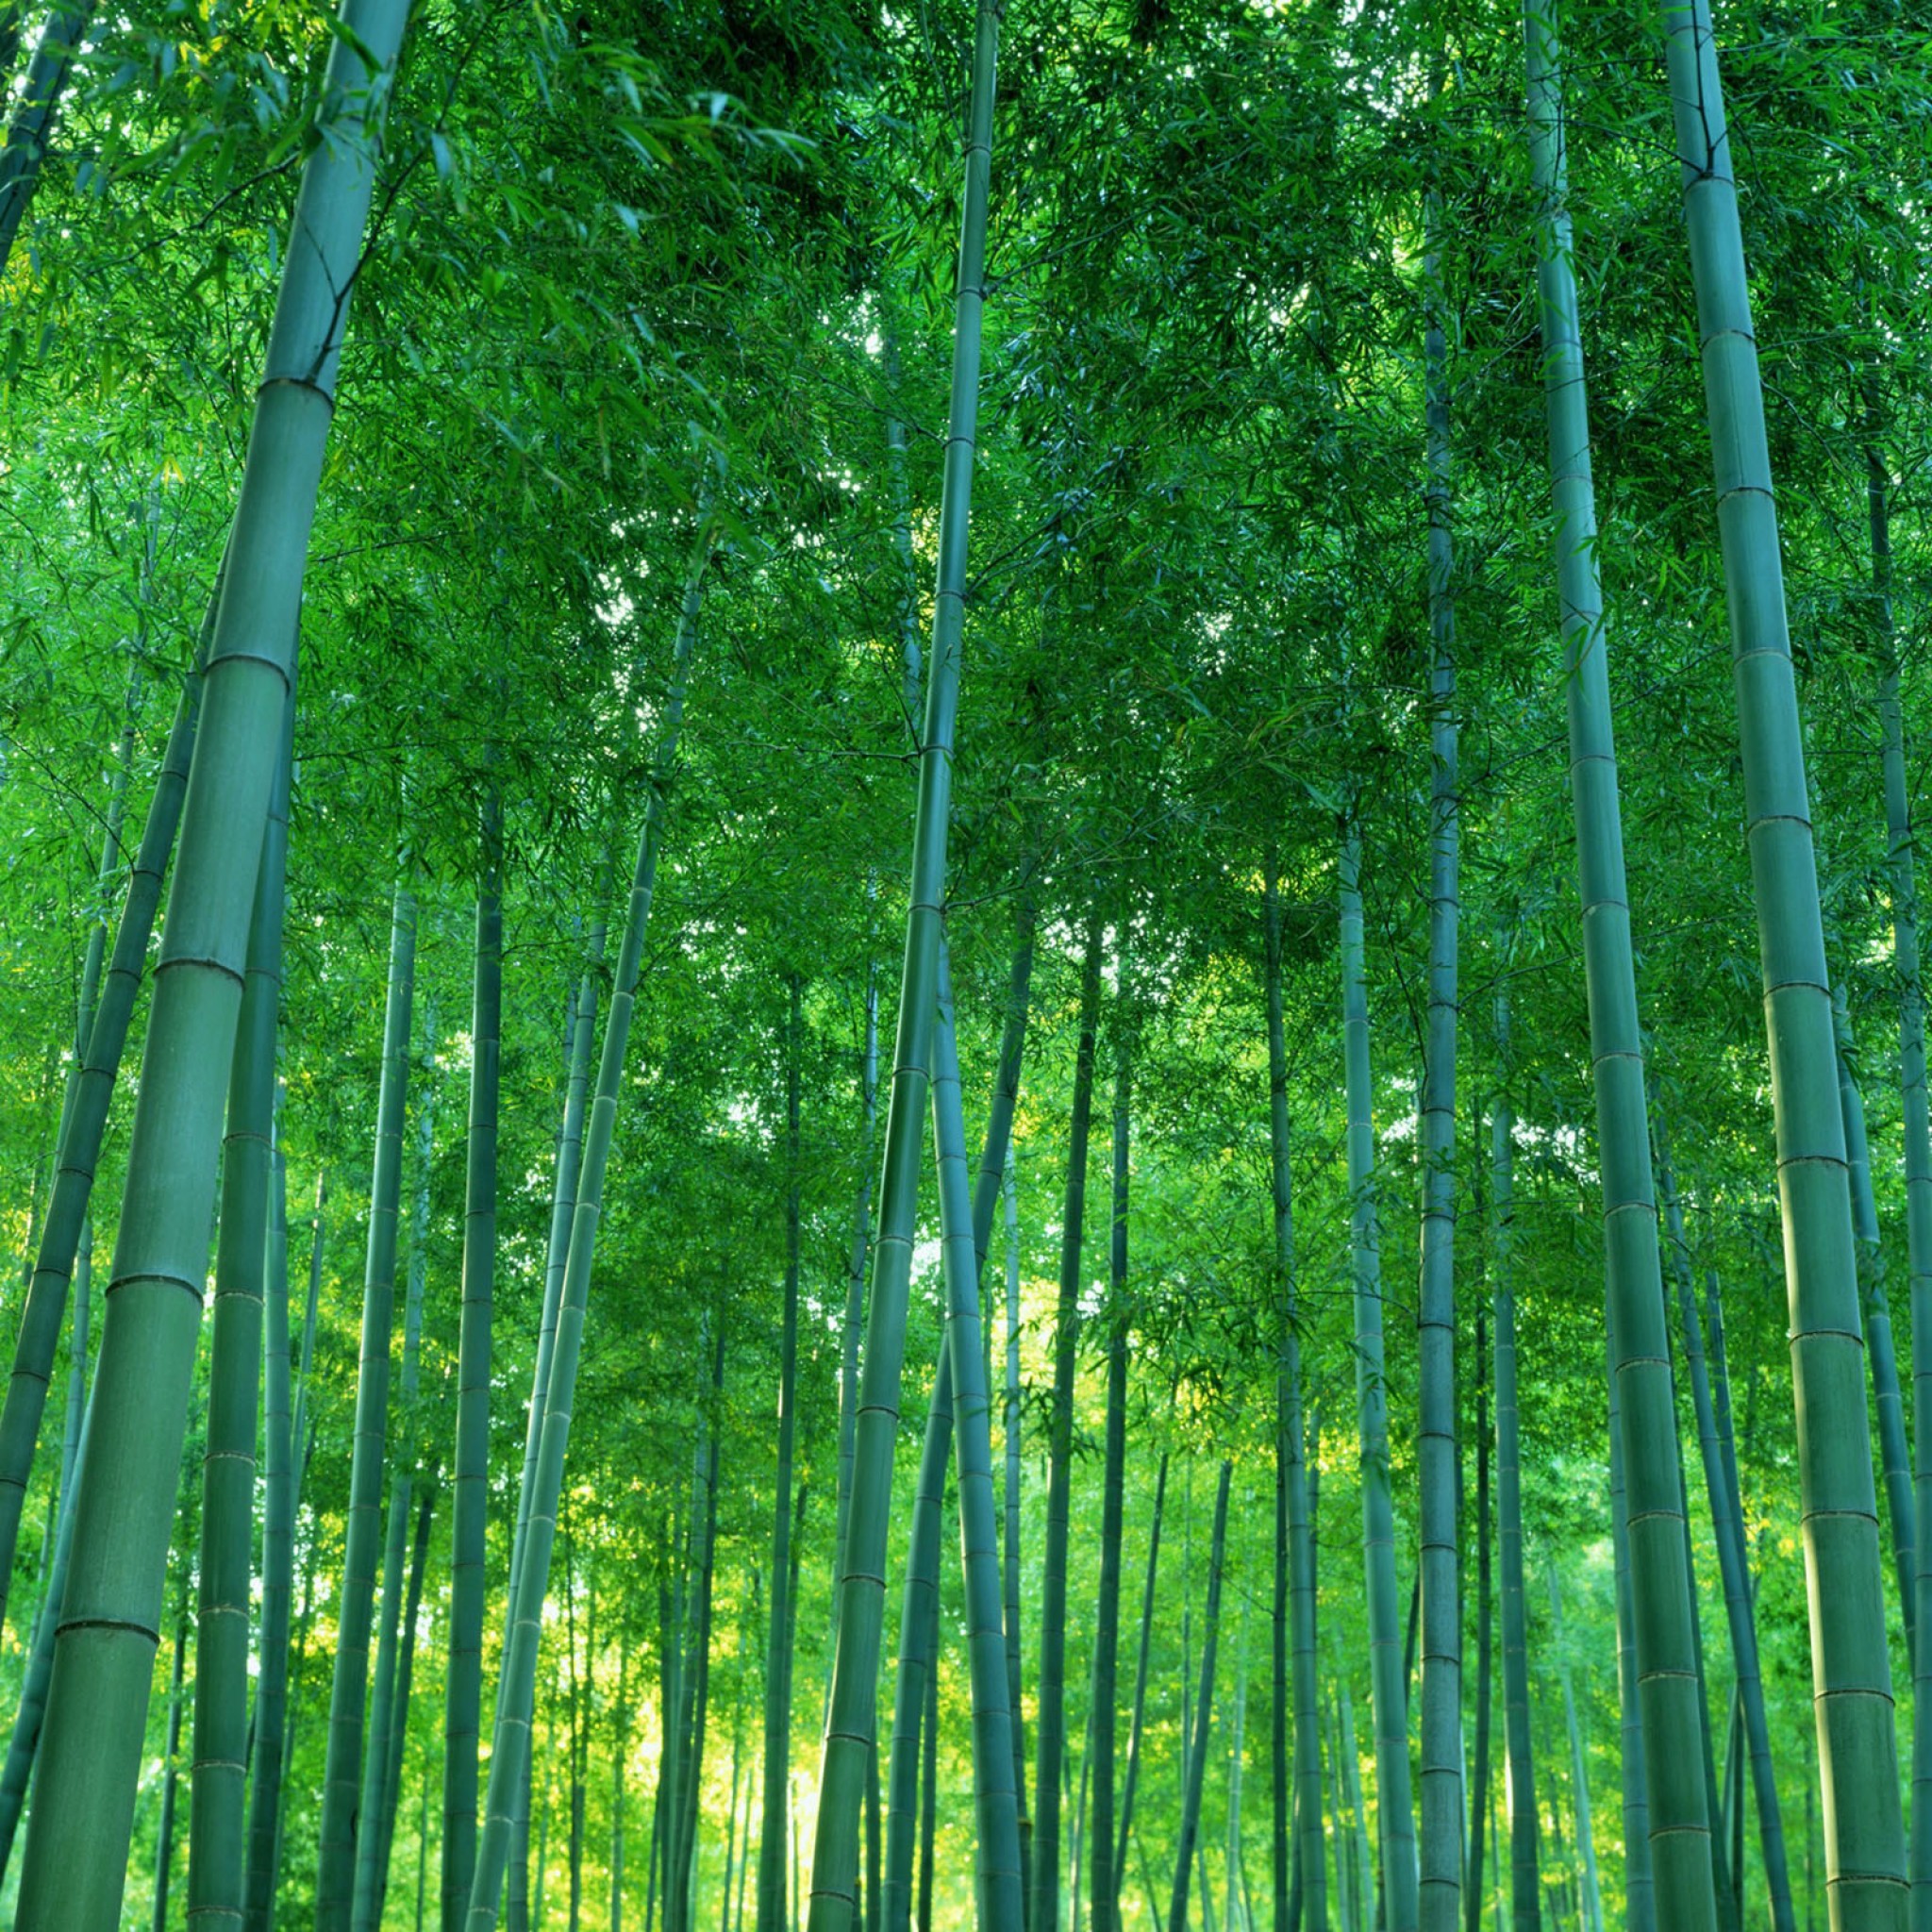 Green Bamboo Forest Images Photos Picture Wallpaper Download